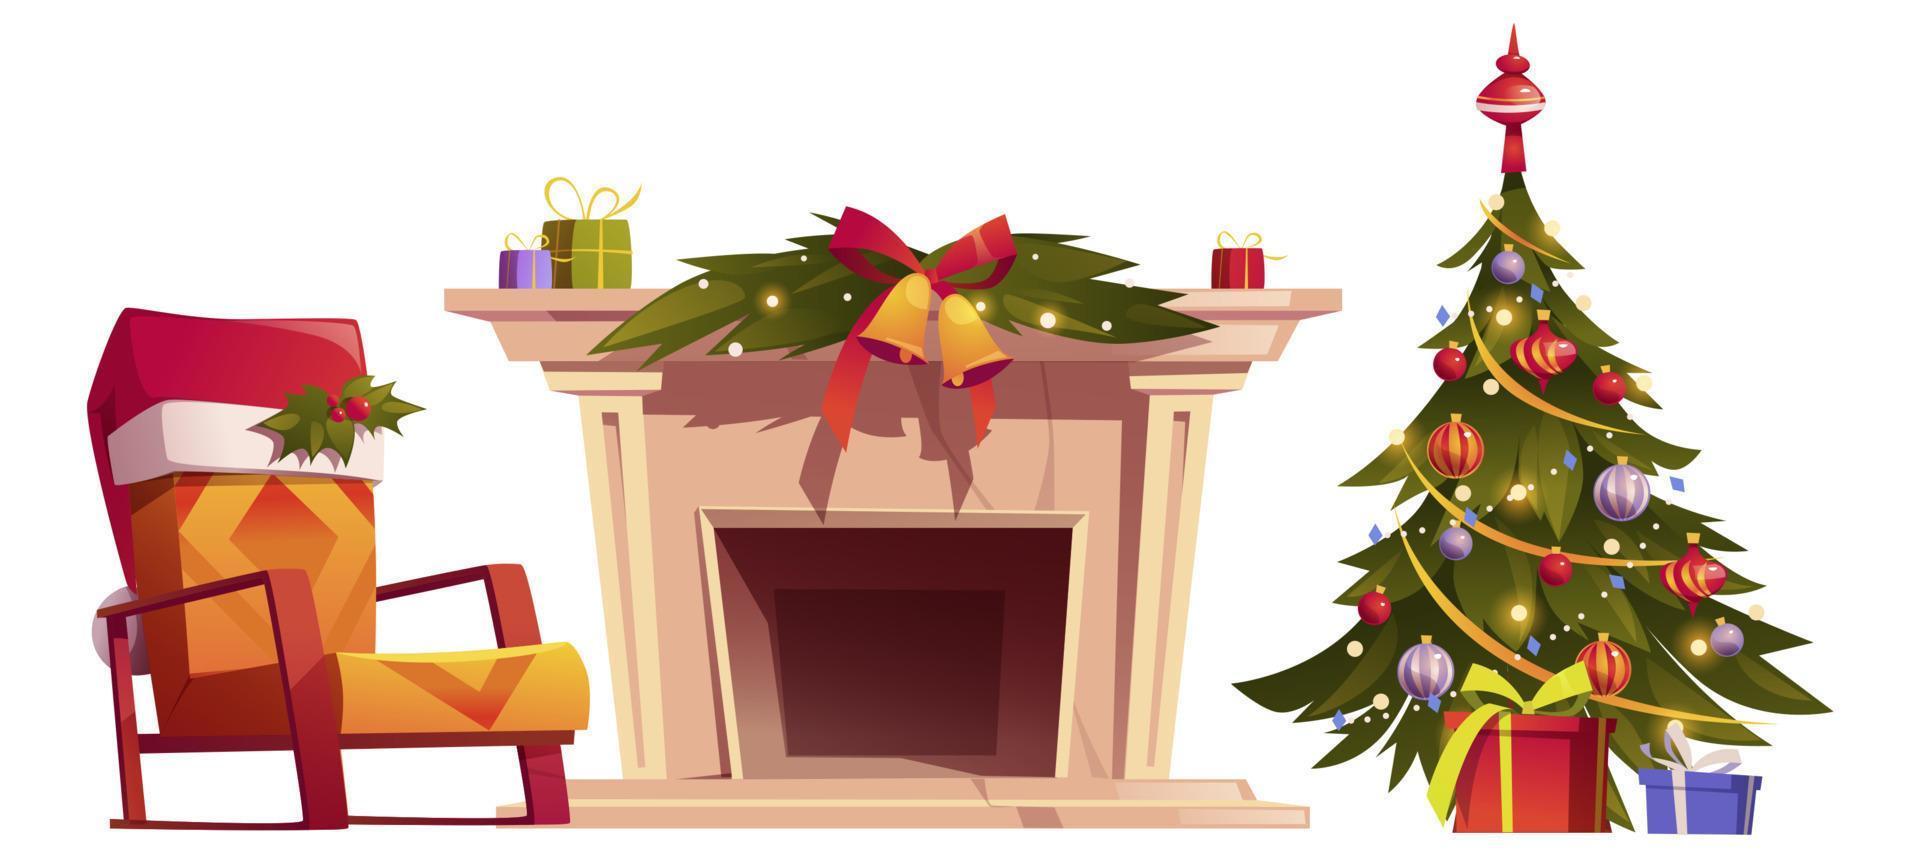 Home interior with Christmas tree and gift boxes vector